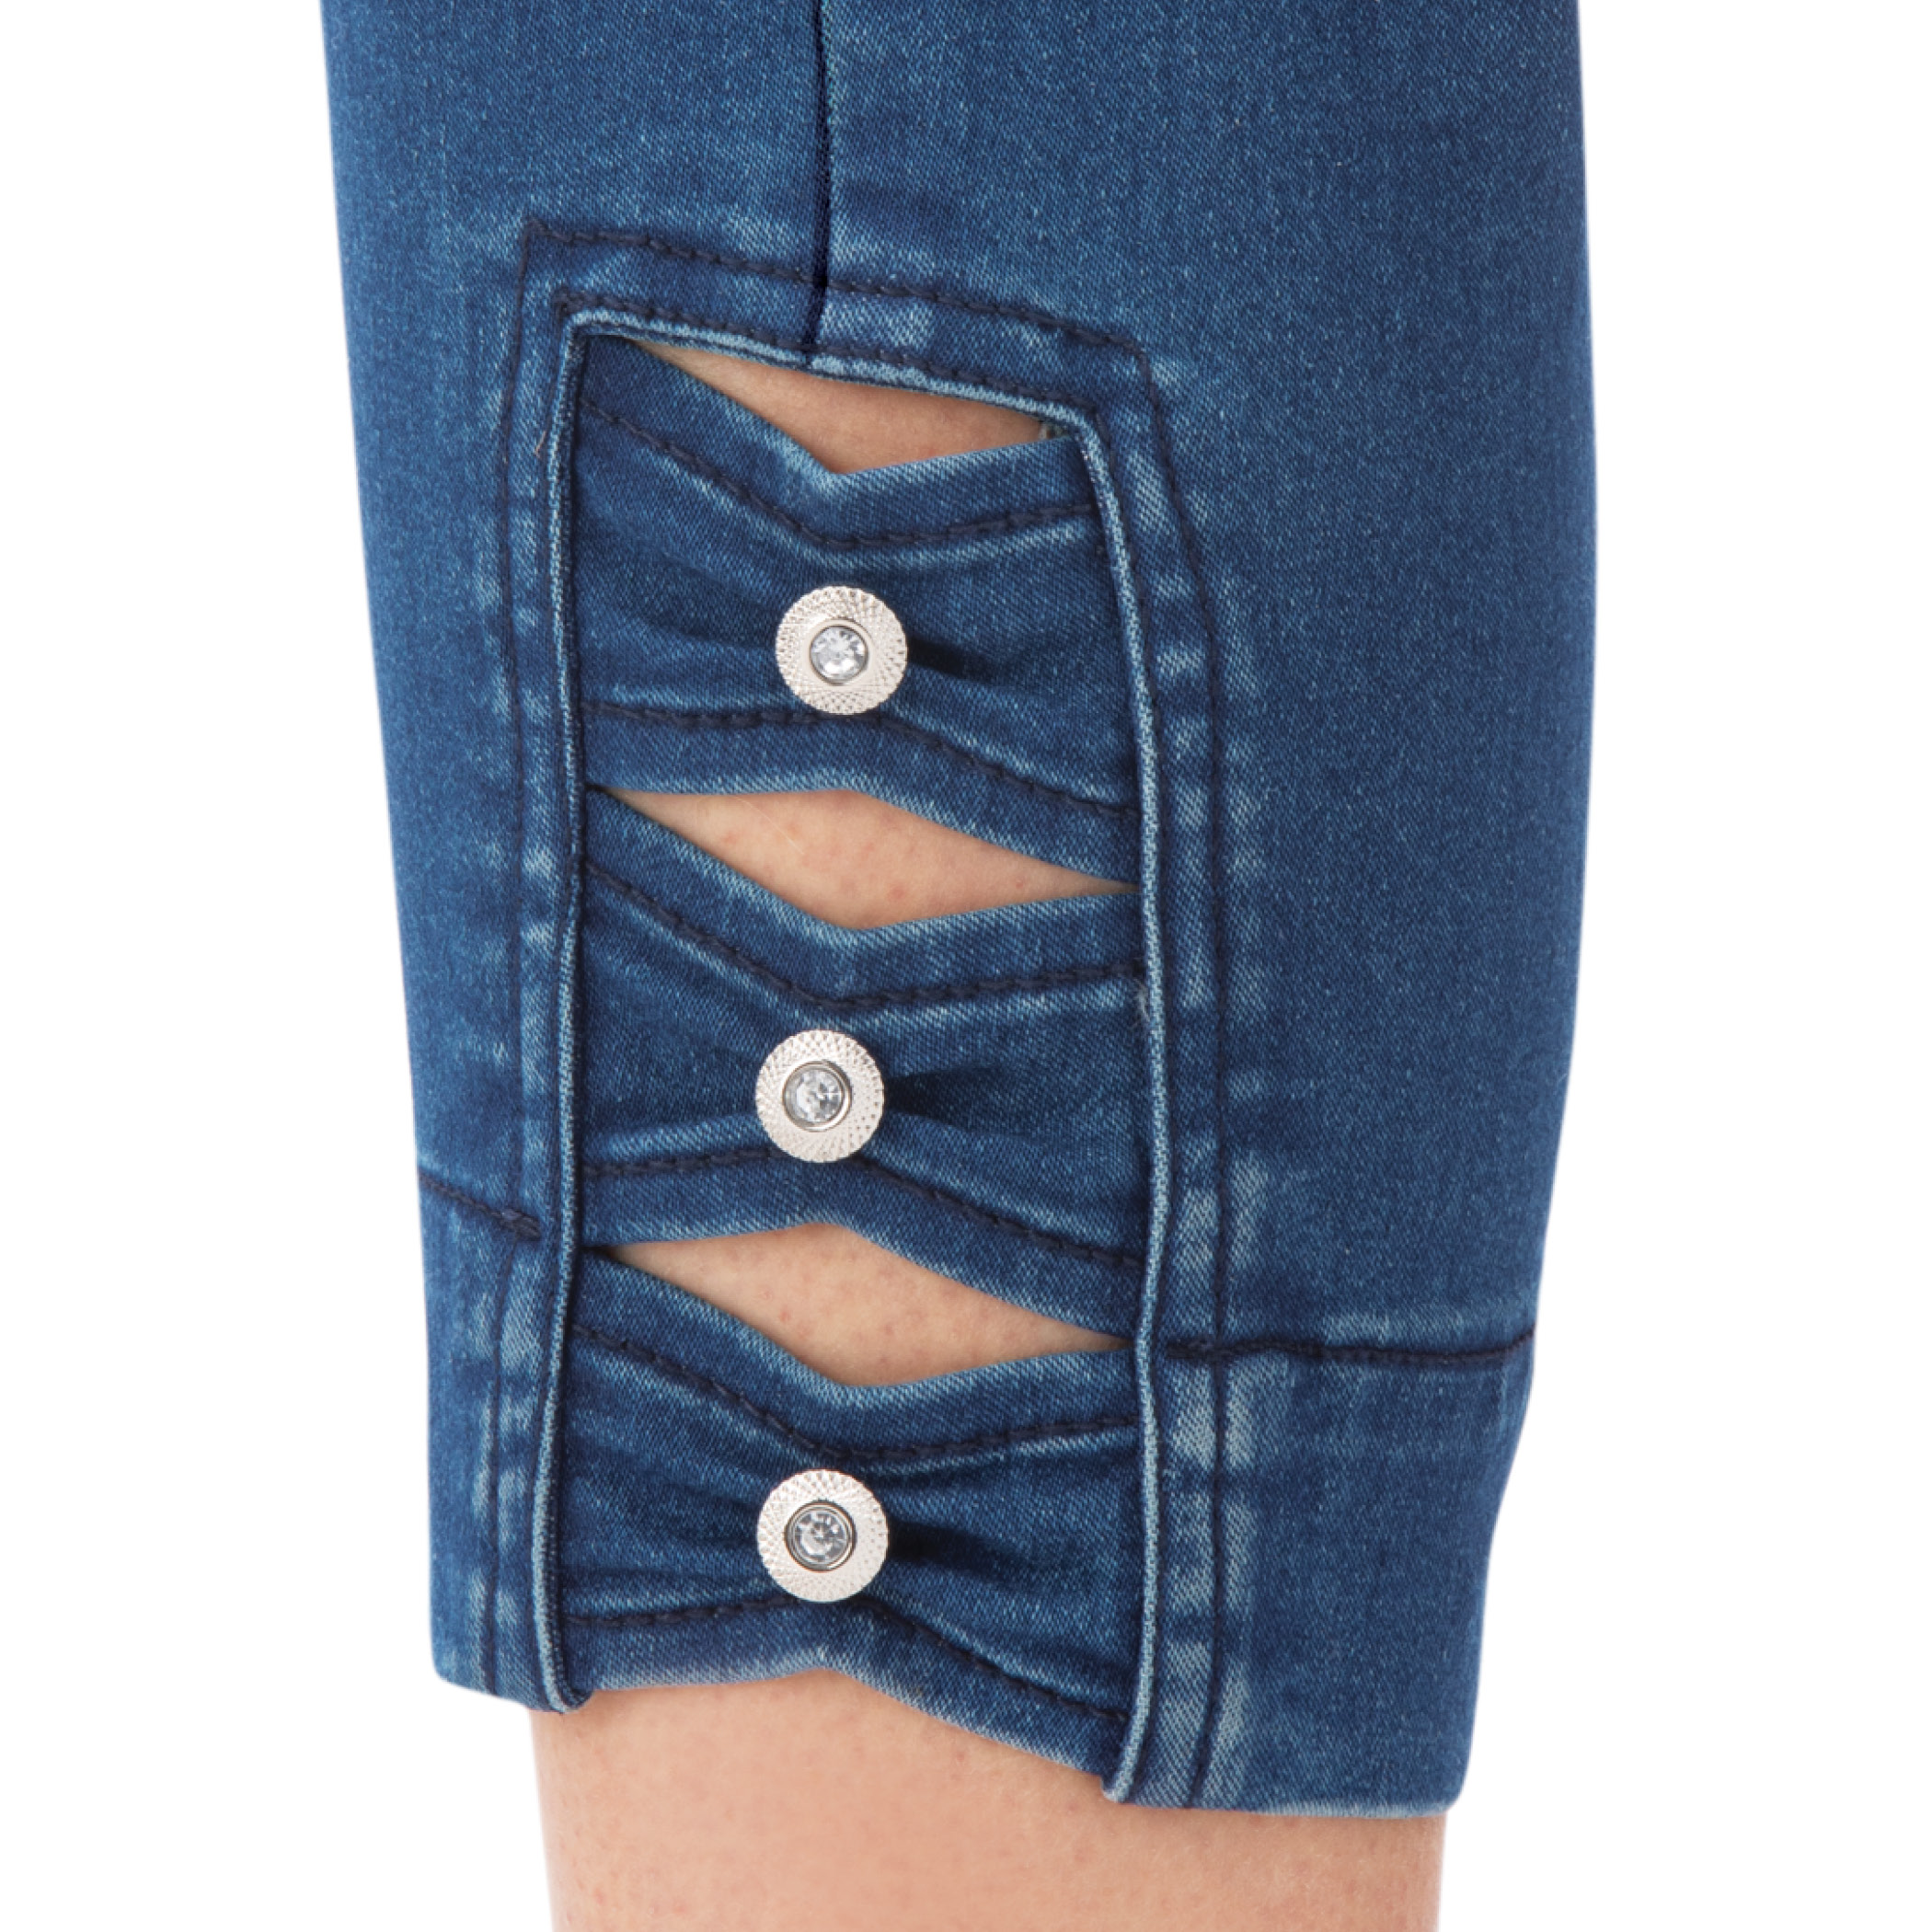 Collections Etc Elastic Waist Pull-on Denim Capri Jean Pants with Decorative Button Detail - image 3 of 4